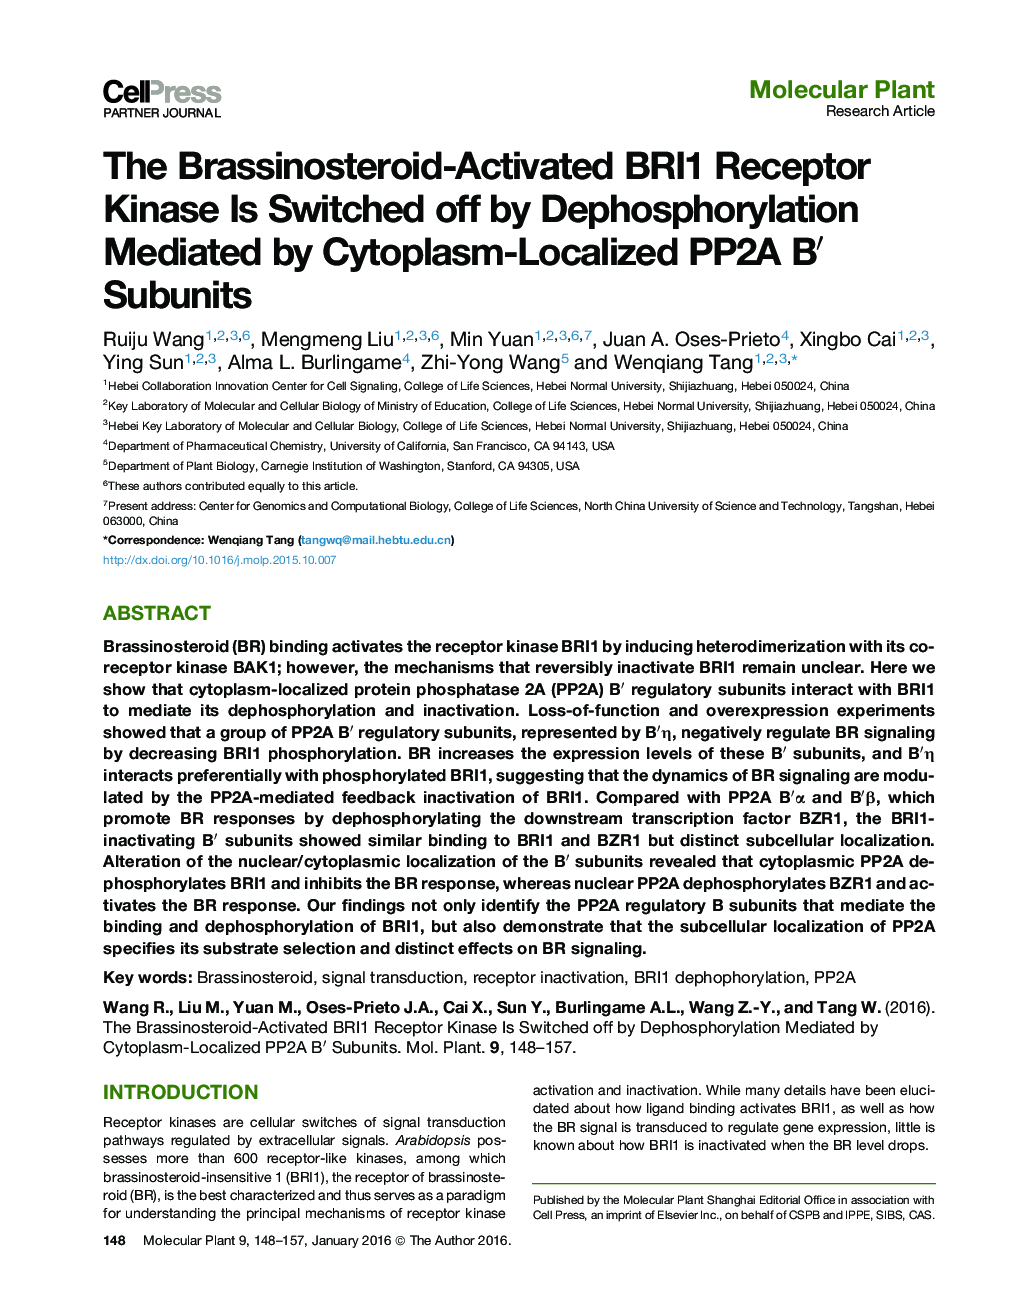 The Brassinosteroid-Activated BRI1 Receptor Kinase Is Switched off by Dephosphorylation Mediated by Cytoplasm-Localized PP2A B′ Subunits 